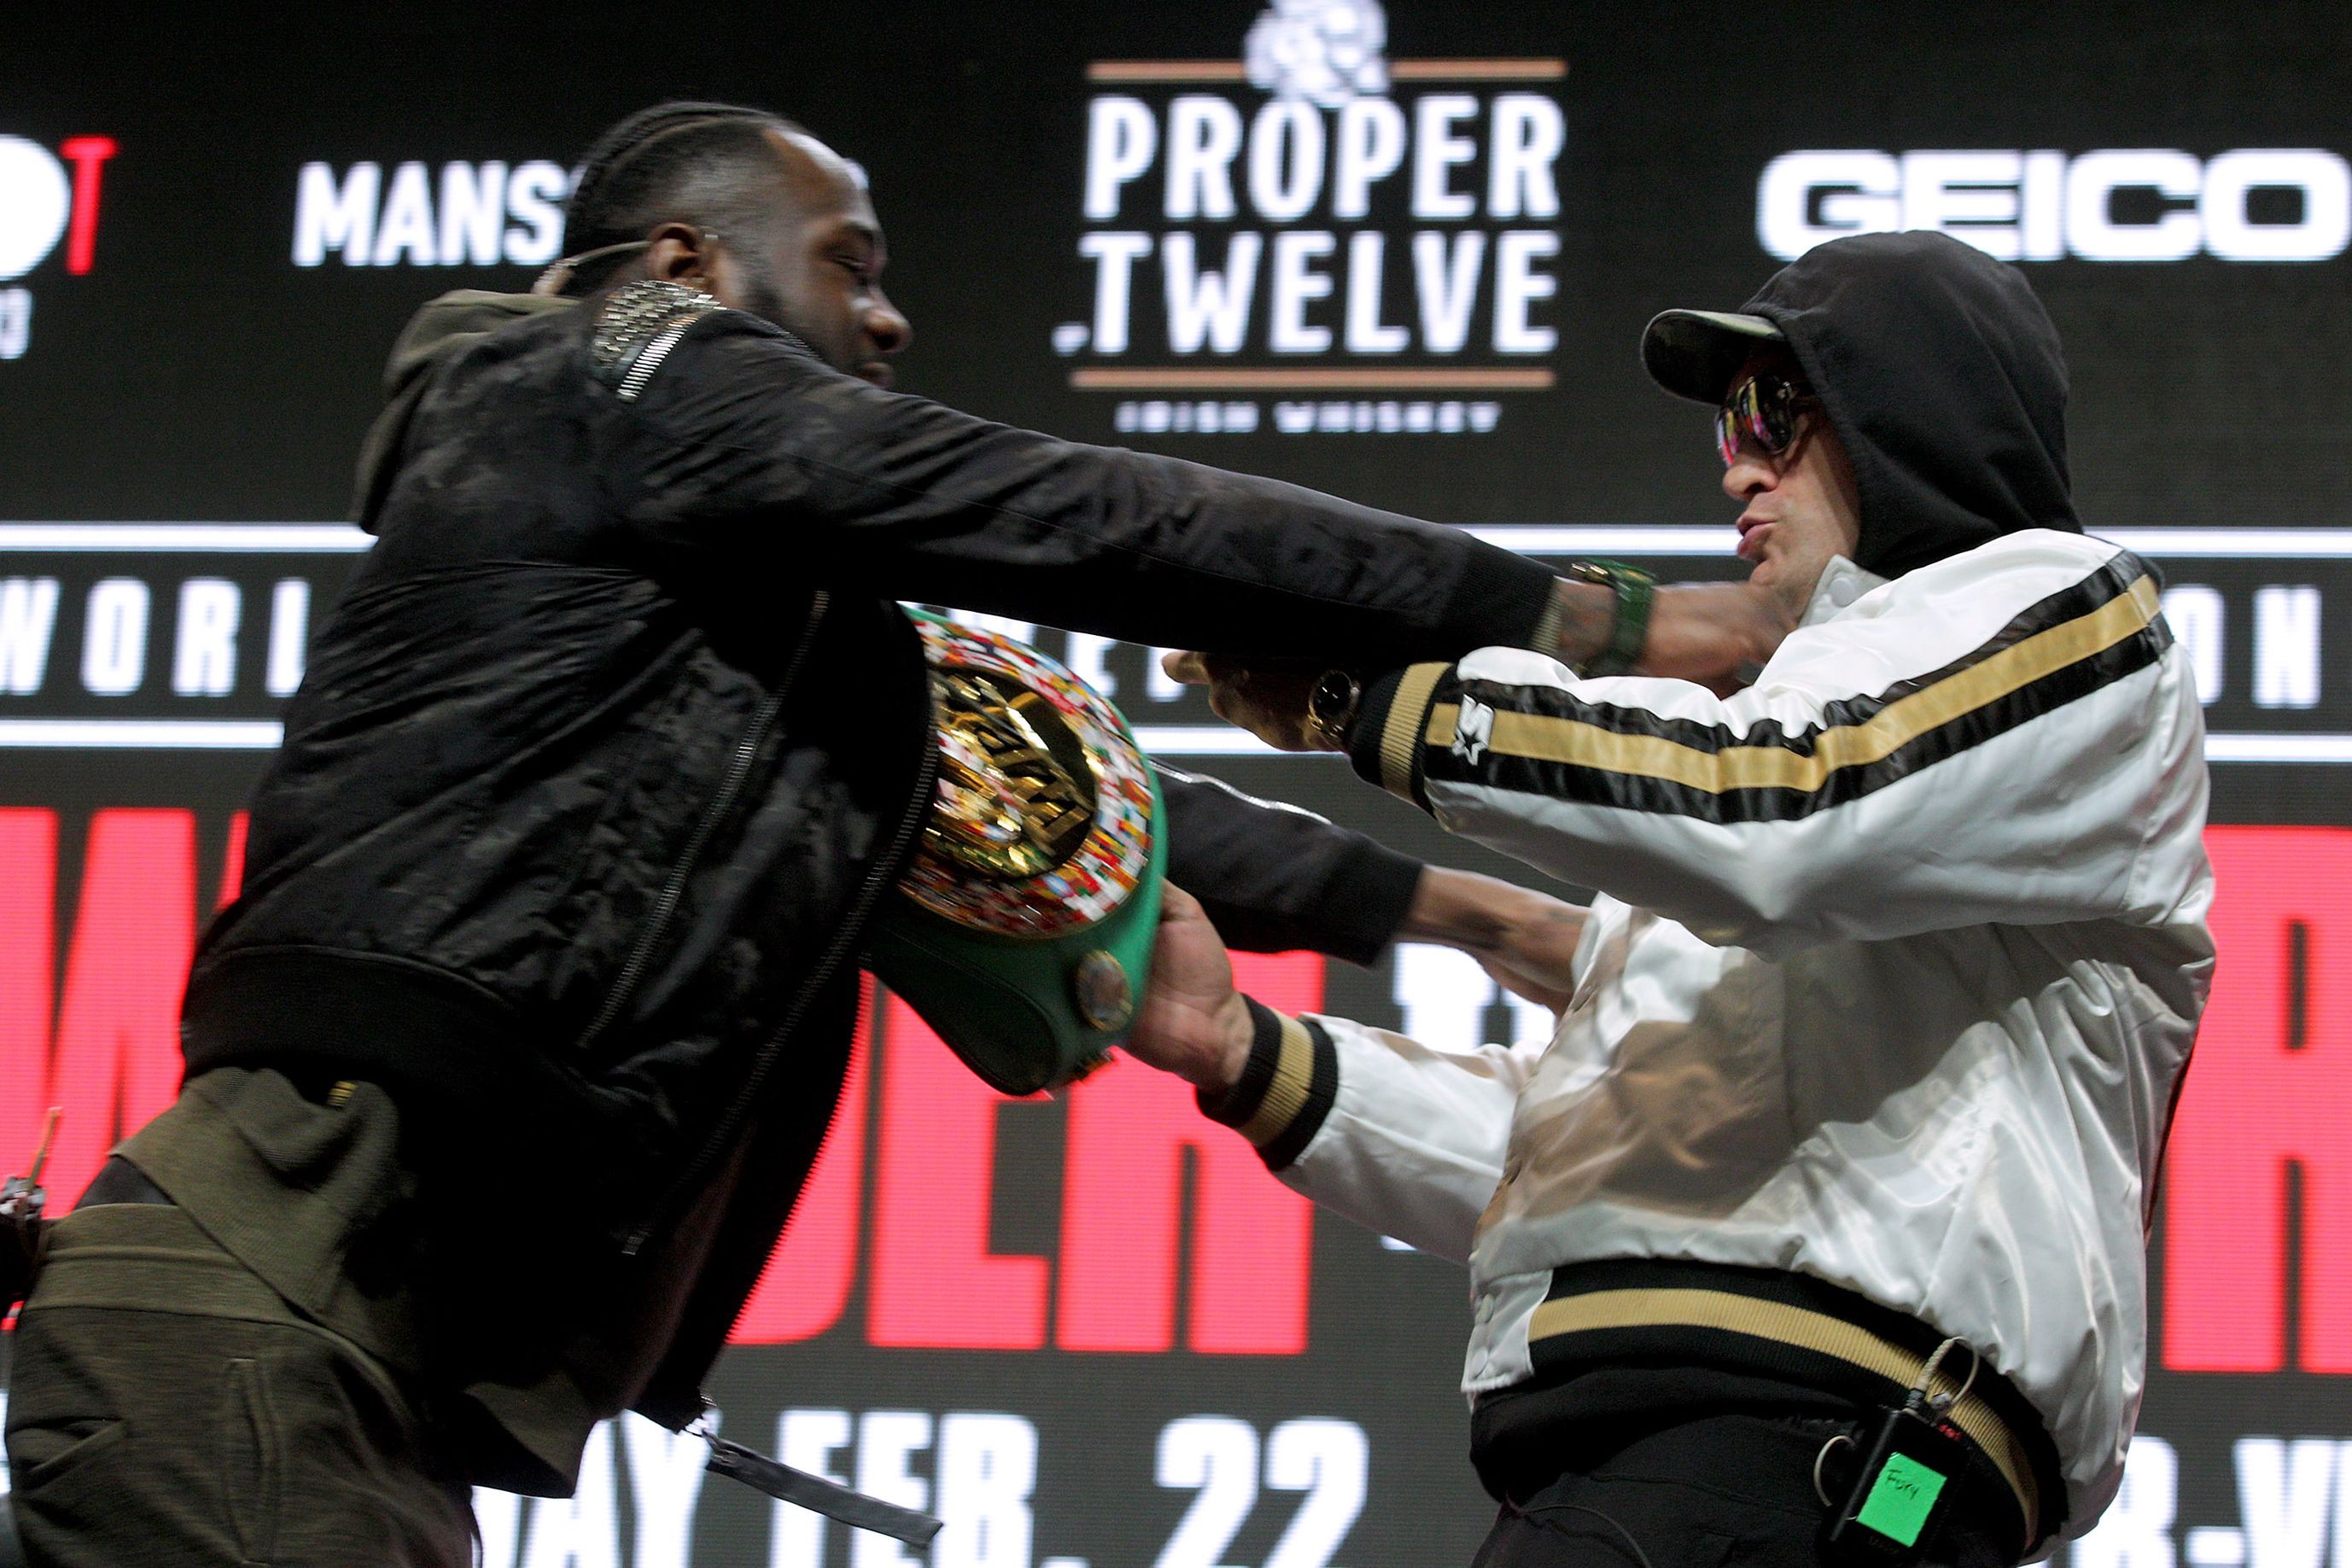 Deontay Wilder and Tyson Fury face off head of their title fight on Saturday. Photo: AFP